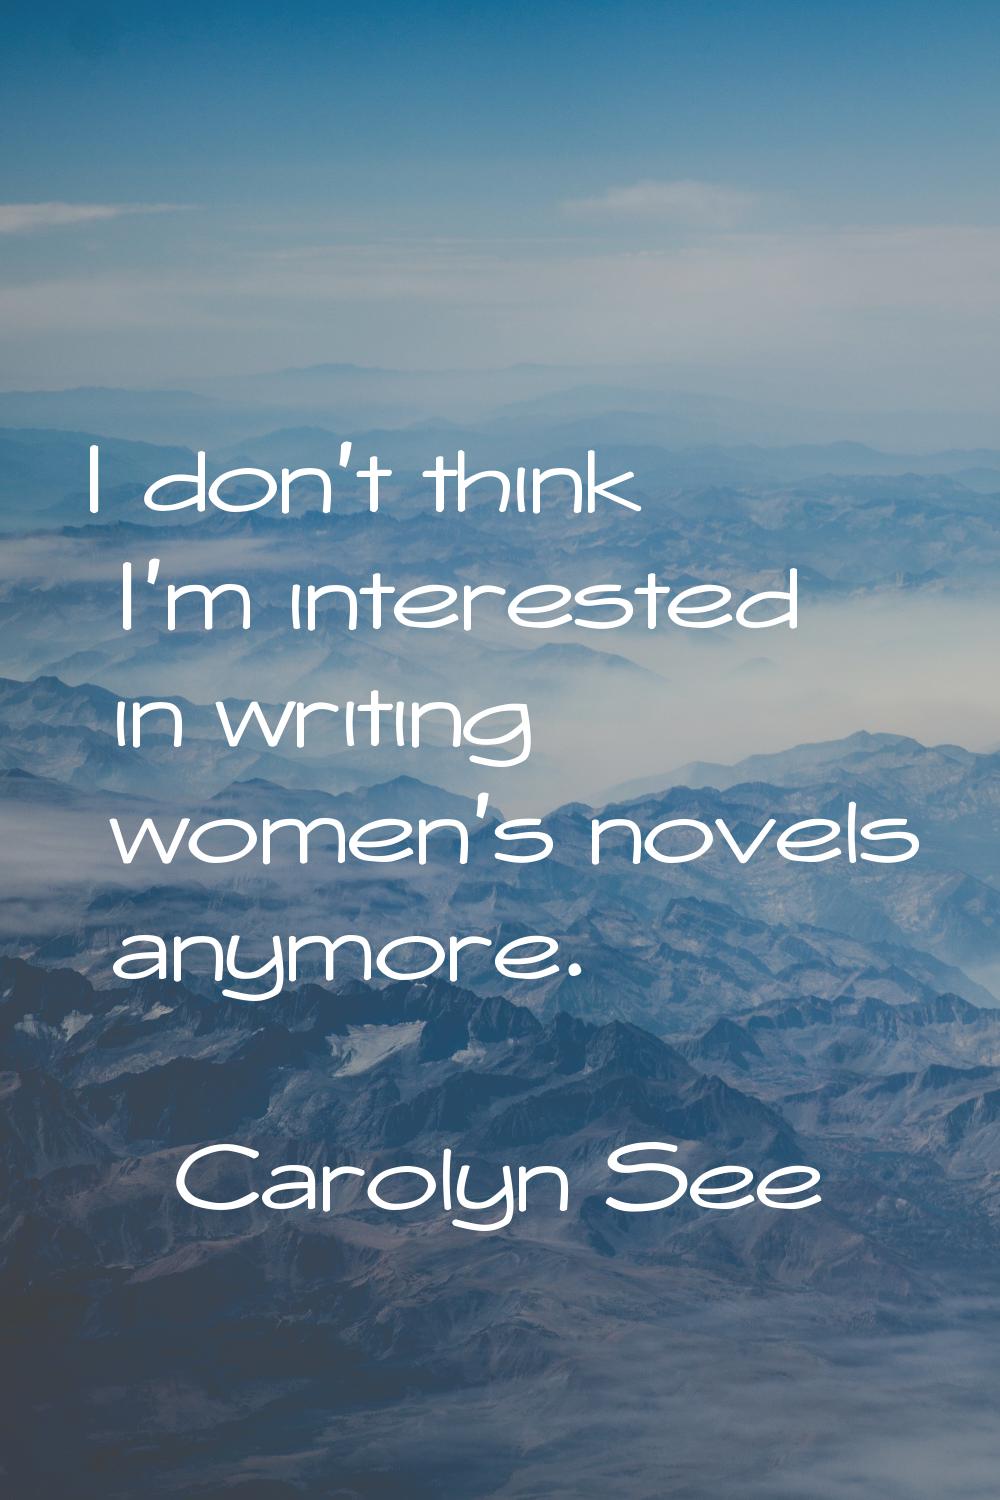 I don't think I'm interested in writing women's novels anymore.